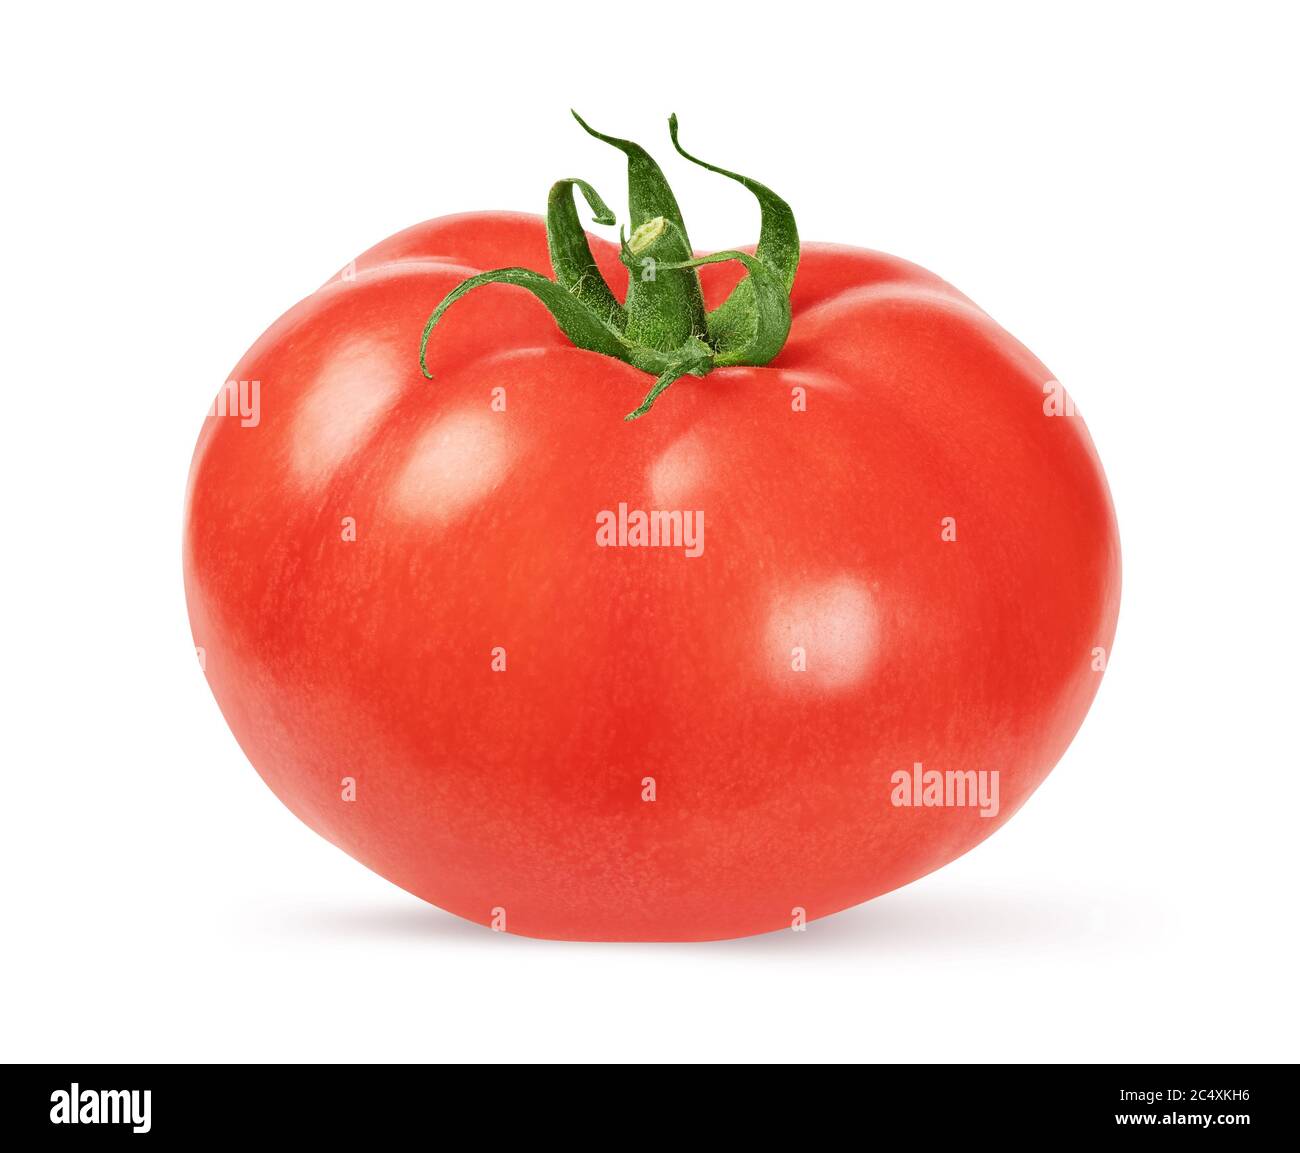 One whole tomato isolated on white background with clipping path Stock Photo